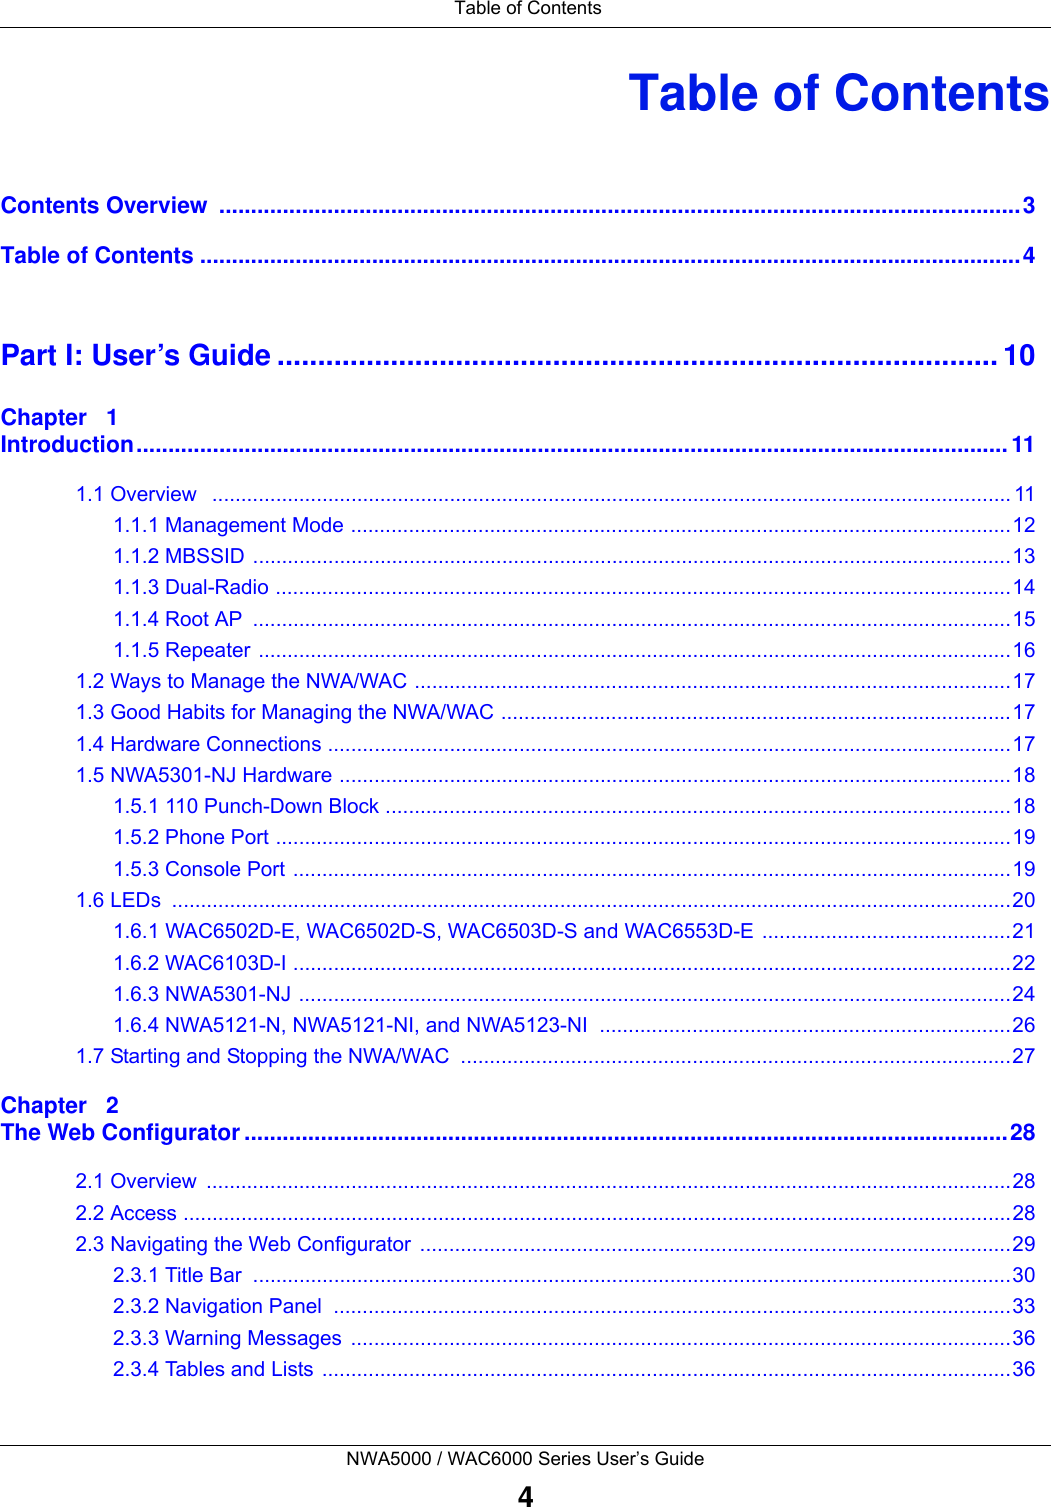 Table of ContentsNWA5000 / WAC6000 Series User’s Guide4Table of ContentsContents Overview  ..............................................................................................................................3Table of Contents .................................................................................................................................4Part I: User’s Guide ......................................................................................... 10Chapter   1Introduction......................................................................................................................................... 111.1 Overview   .......................................................................................................................................... 111.1.1 Management Mode ..................................................................................................................121.1.2 MBSSID ...................................................................................................................................131.1.3 Dual-Radio ...............................................................................................................................141.1.4 Root AP  ...................................................................................................................................151.1.5 Repeater ..................................................................................................................................161.2 Ways to Manage the NWA/WAC .......................................................................................................171.3 Good Habits for Managing the NWA/WAC ........................................................................................171.4 Hardware Connections ......................................................................................................................171.5 NWA5301-NJ Hardware ....................................................................................................................181.5.1 110 Punch-Down Block ............................................................................................................181.5.2 Phone Port ...............................................................................................................................191.5.3 Console Port ............................................................................................................................191.6 LEDs  .................................................................................................................................................201.6.1 WAC6502D-E, WAC6502D-S, WAC6503D-S and WAC6553D-E ...........................................211.6.2 WAC6103D-I ............................................................................................................................221.6.3 NWA5301-NJ ...........................................................................................................................241.6.4 NWA5121-N, NWA5121-NI, and NWA5123-NI  .......................................................................261.7 Starting and Stopping the NWA/WAC  ...............................................................................................27Chapter   2The Web Configurator ........................................................................................................................282.1 Overview  ...........................................................................................................................................282.2 Access ...............................................................................................................................................282.3 Navigating the Web Configurator  ......................................................................................................292.3.1 Title Bar  ...................................................................................................................................302.3.2 Navigation Panel  .....................................................................................................................332.3.3 Warning Messages  ..................................................................................................................362.3.4 Tables and Lists .......................................................................................................................36